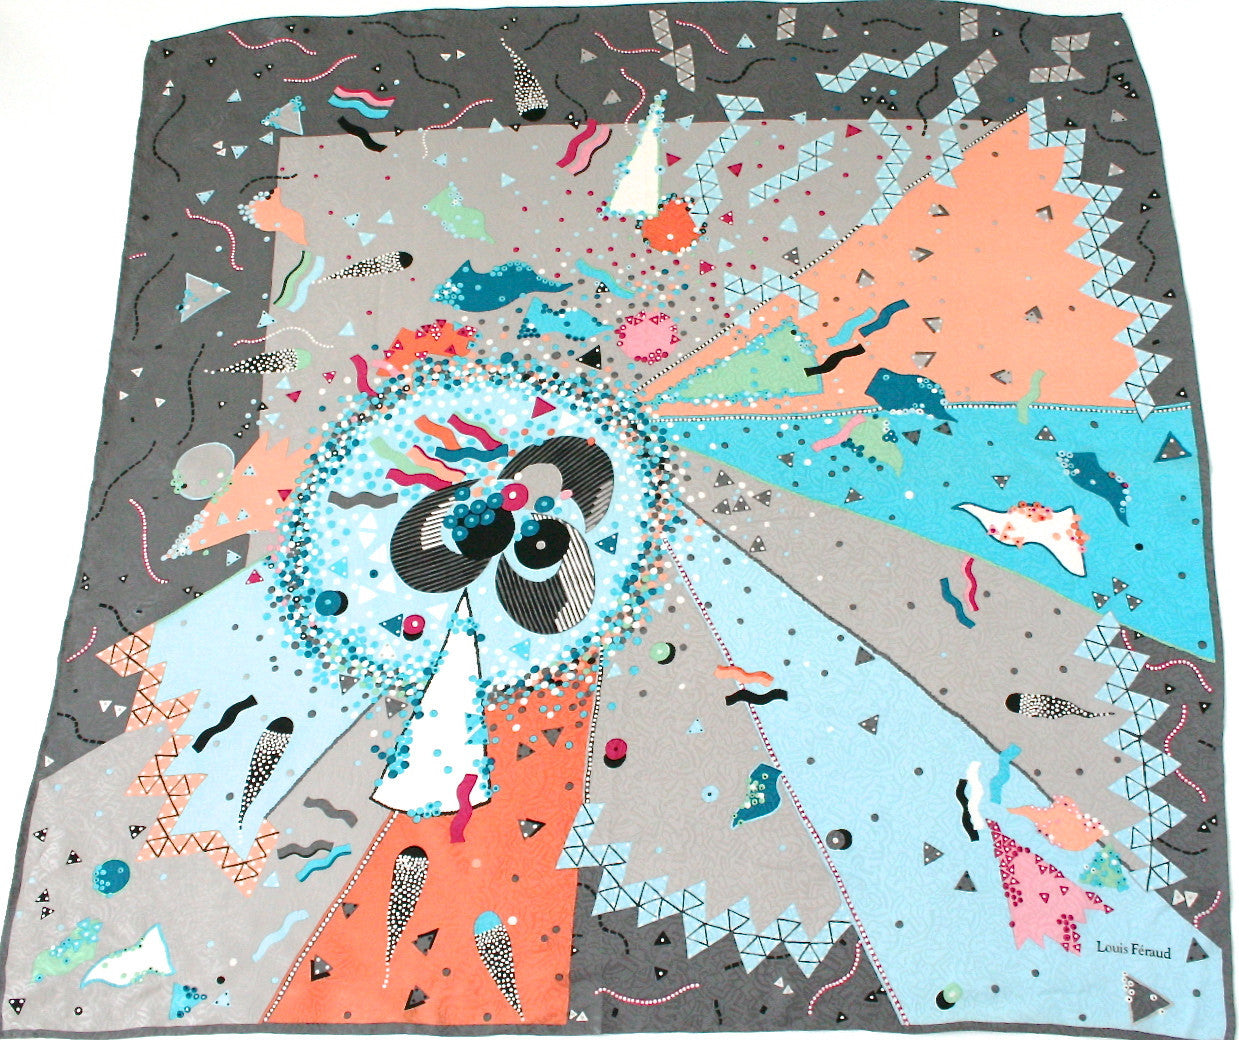 Louis Feraud - Abstract 'Psychedelic Explosion' print silk scarf 